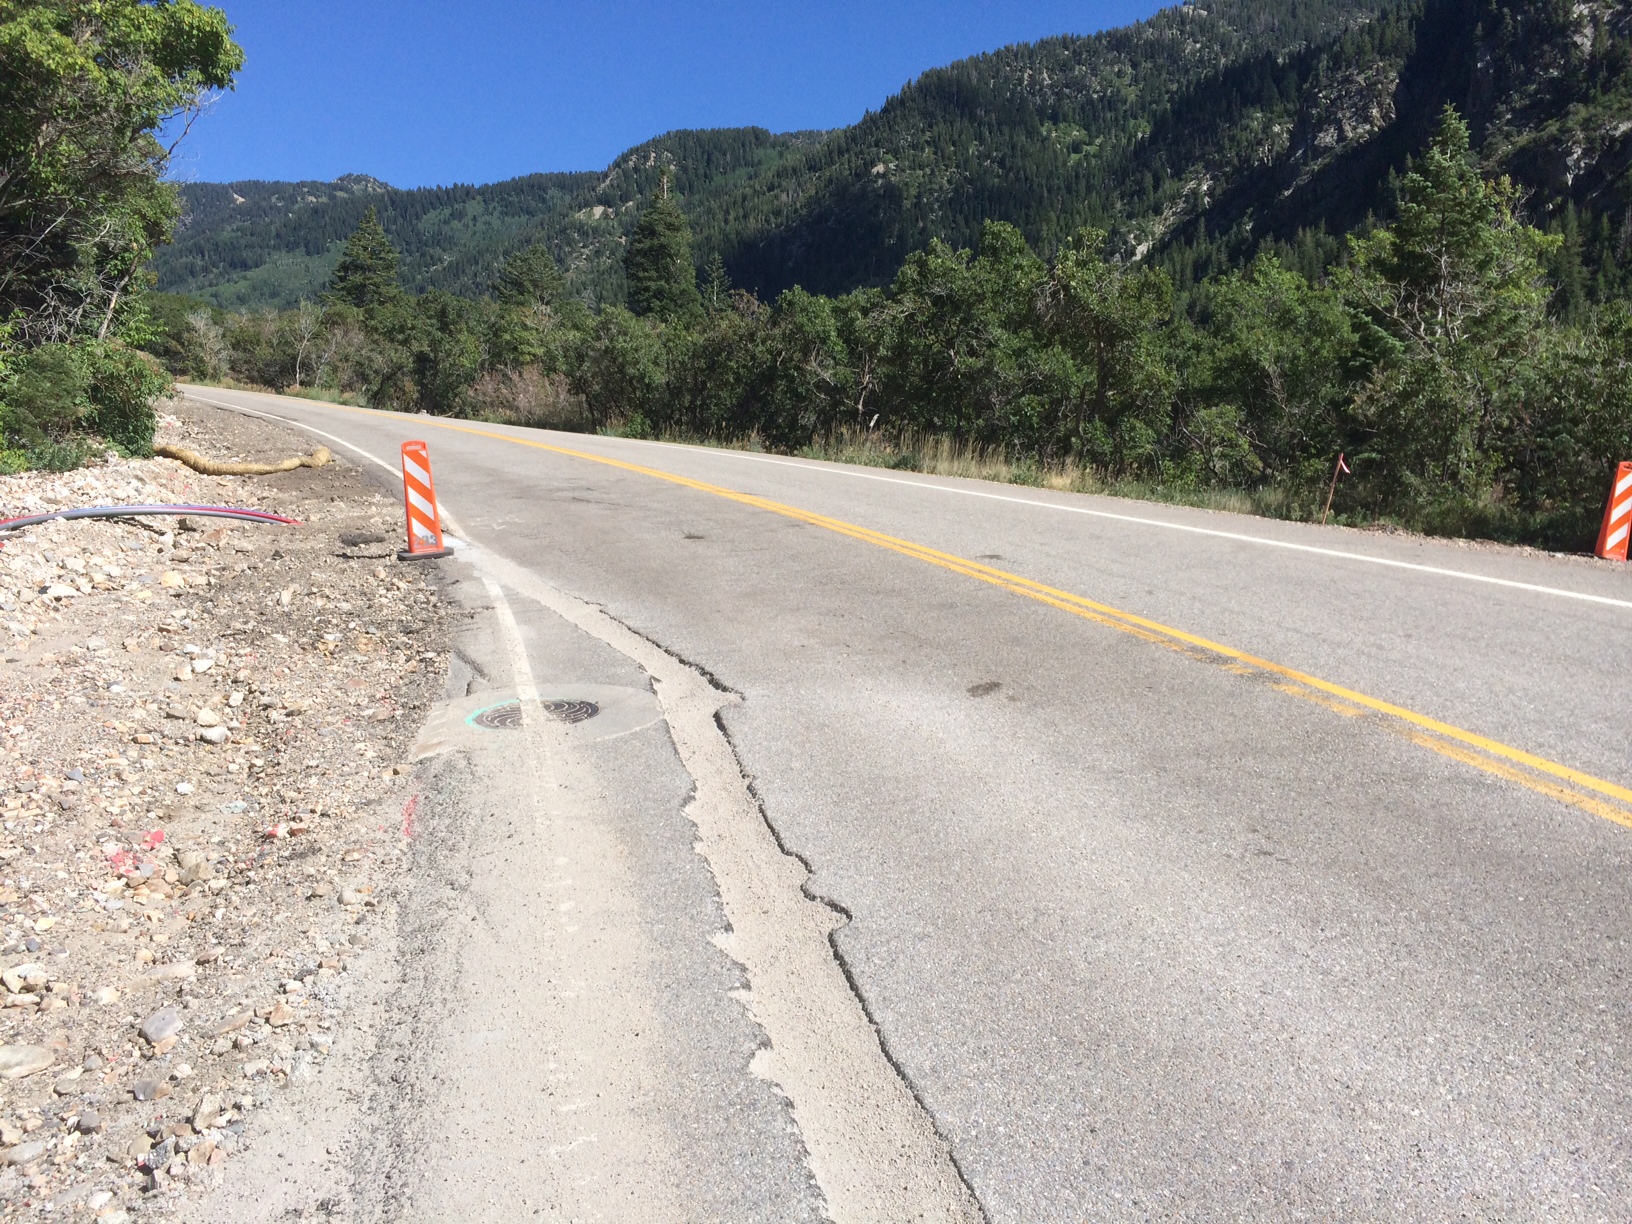 Cyclists Need to Use Caution in Little Cottonwood Canyon, Summer 2014